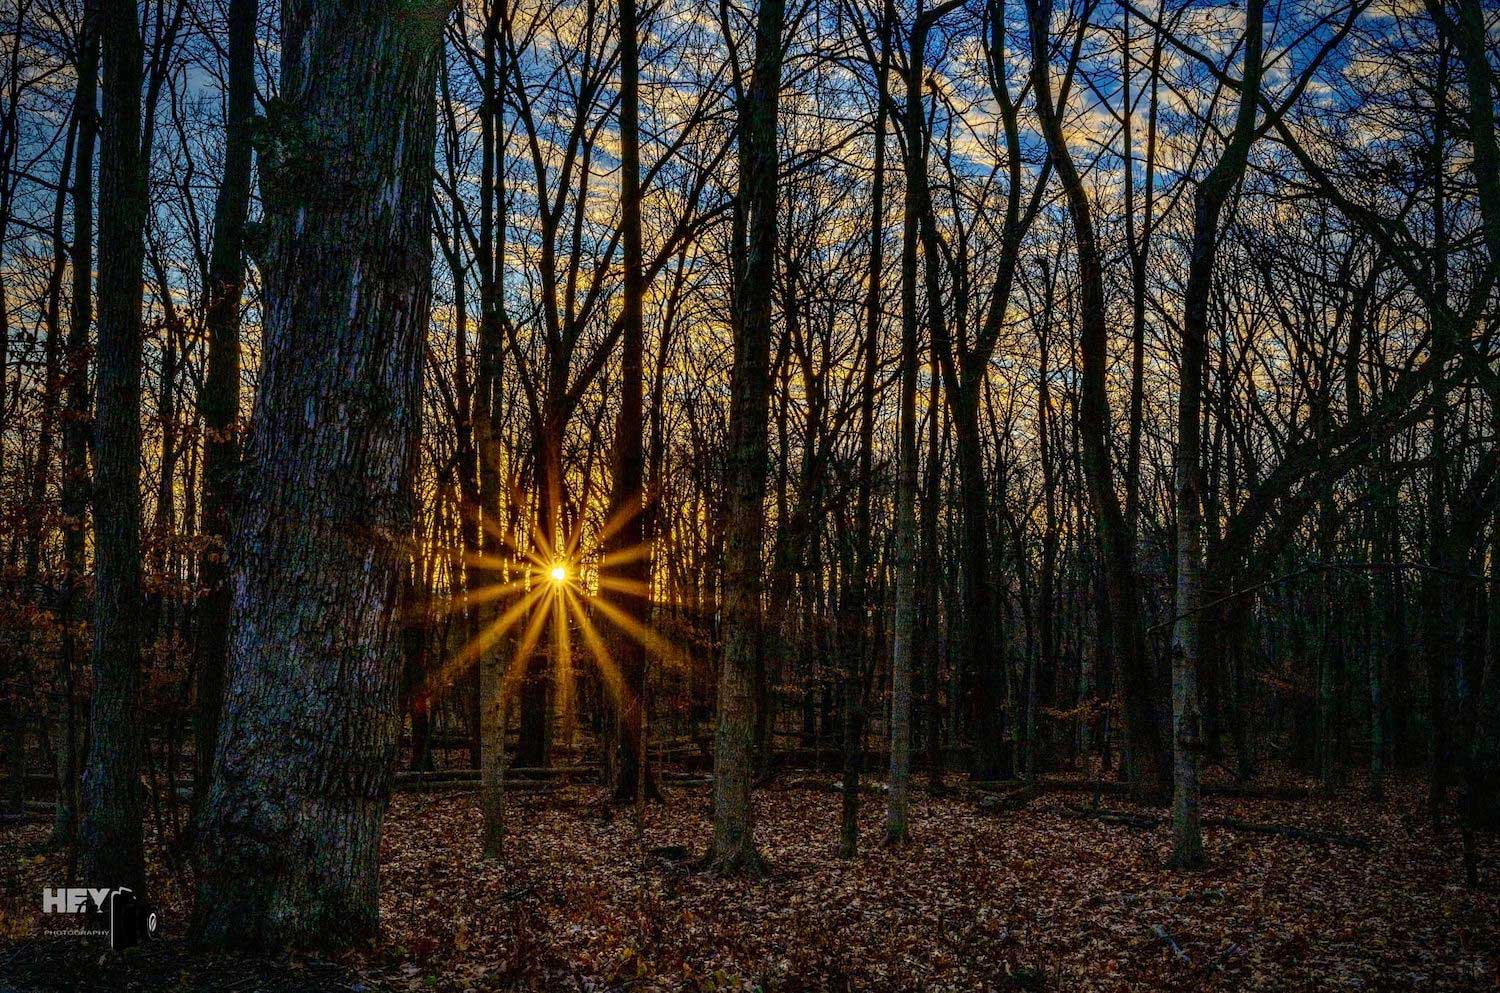 The setting sun can be seen through the bare trees in a forest.